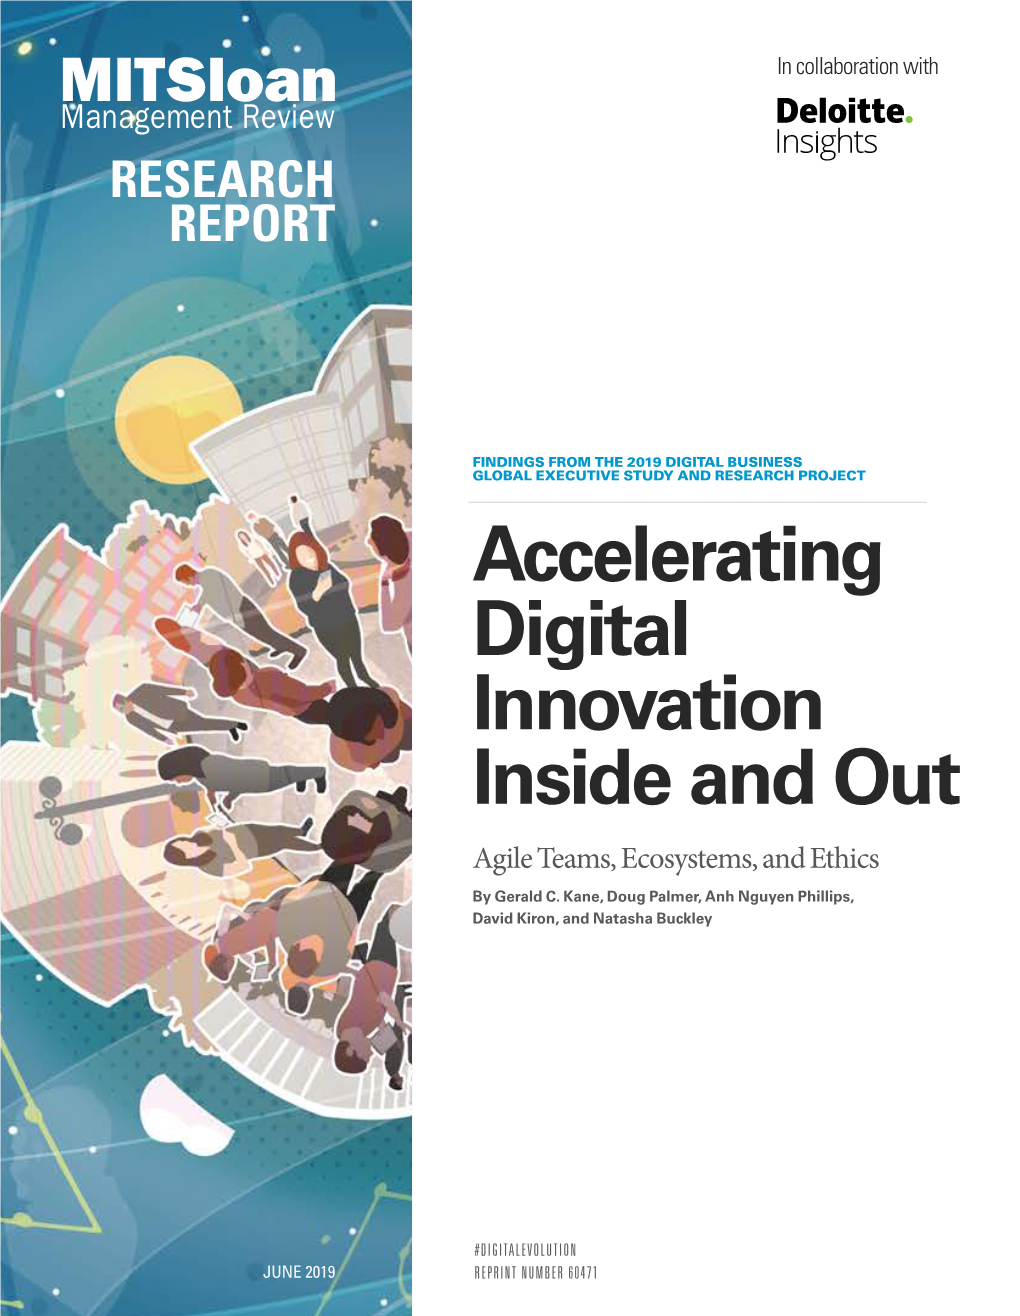 Accelerating Digital Innovation Inside and Out: Agile Teams, Ecosystems, and Ethics